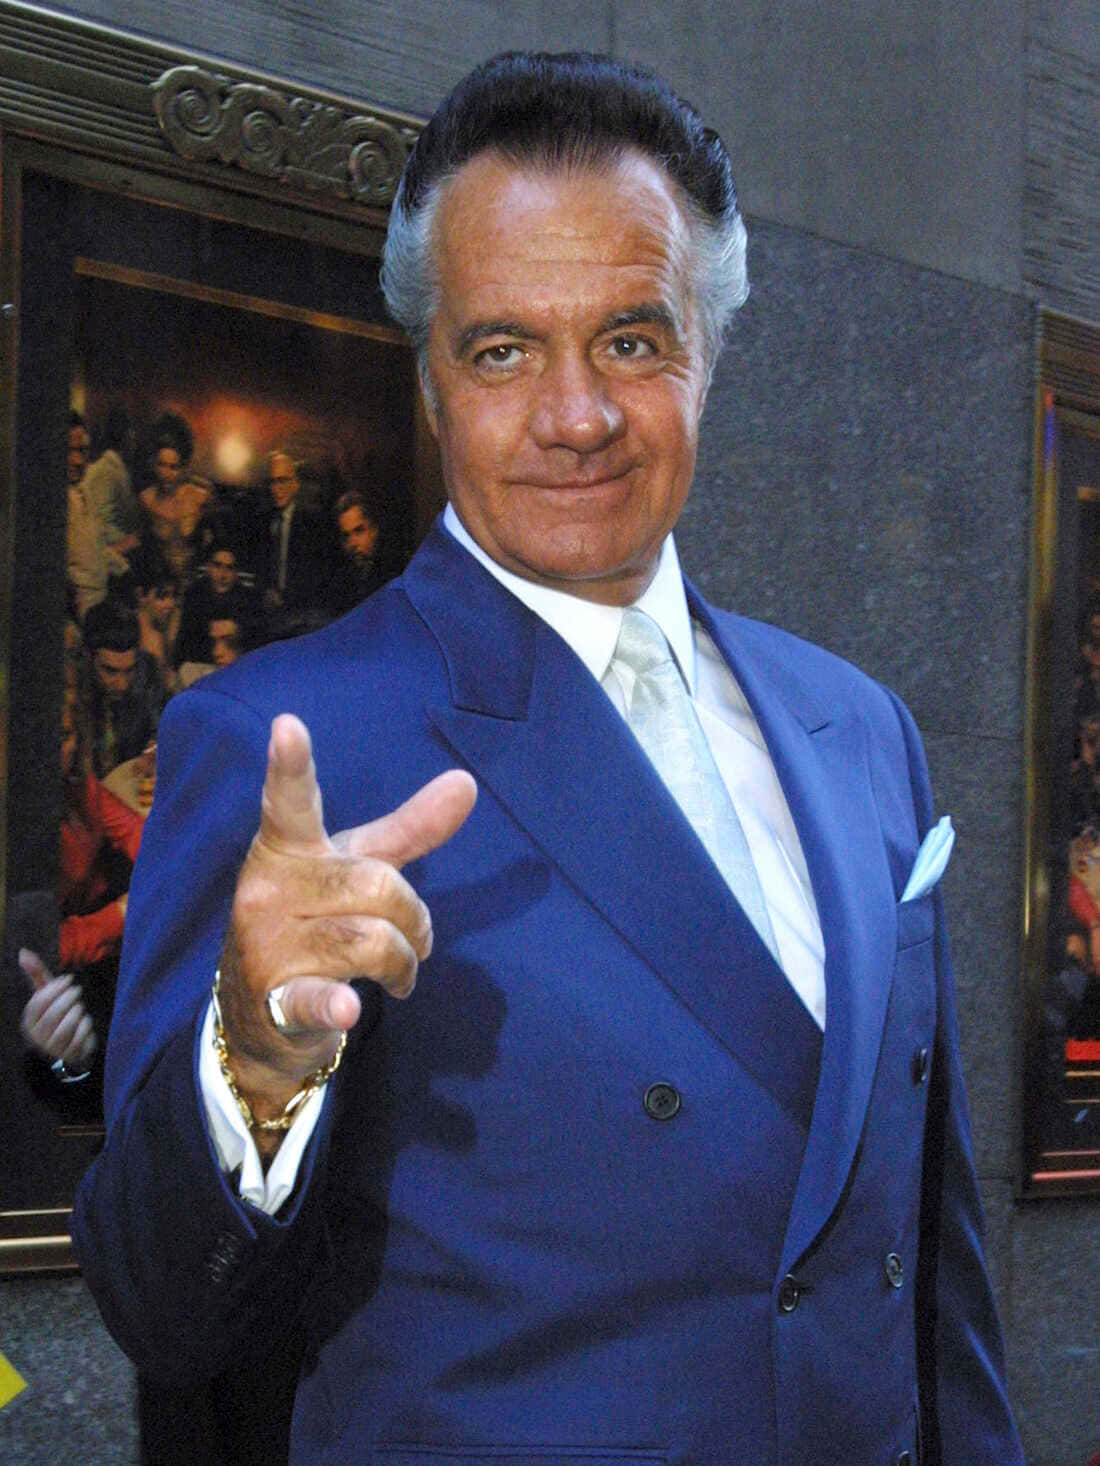 Tony Sirico striking a pose in a black suit Wallpaper